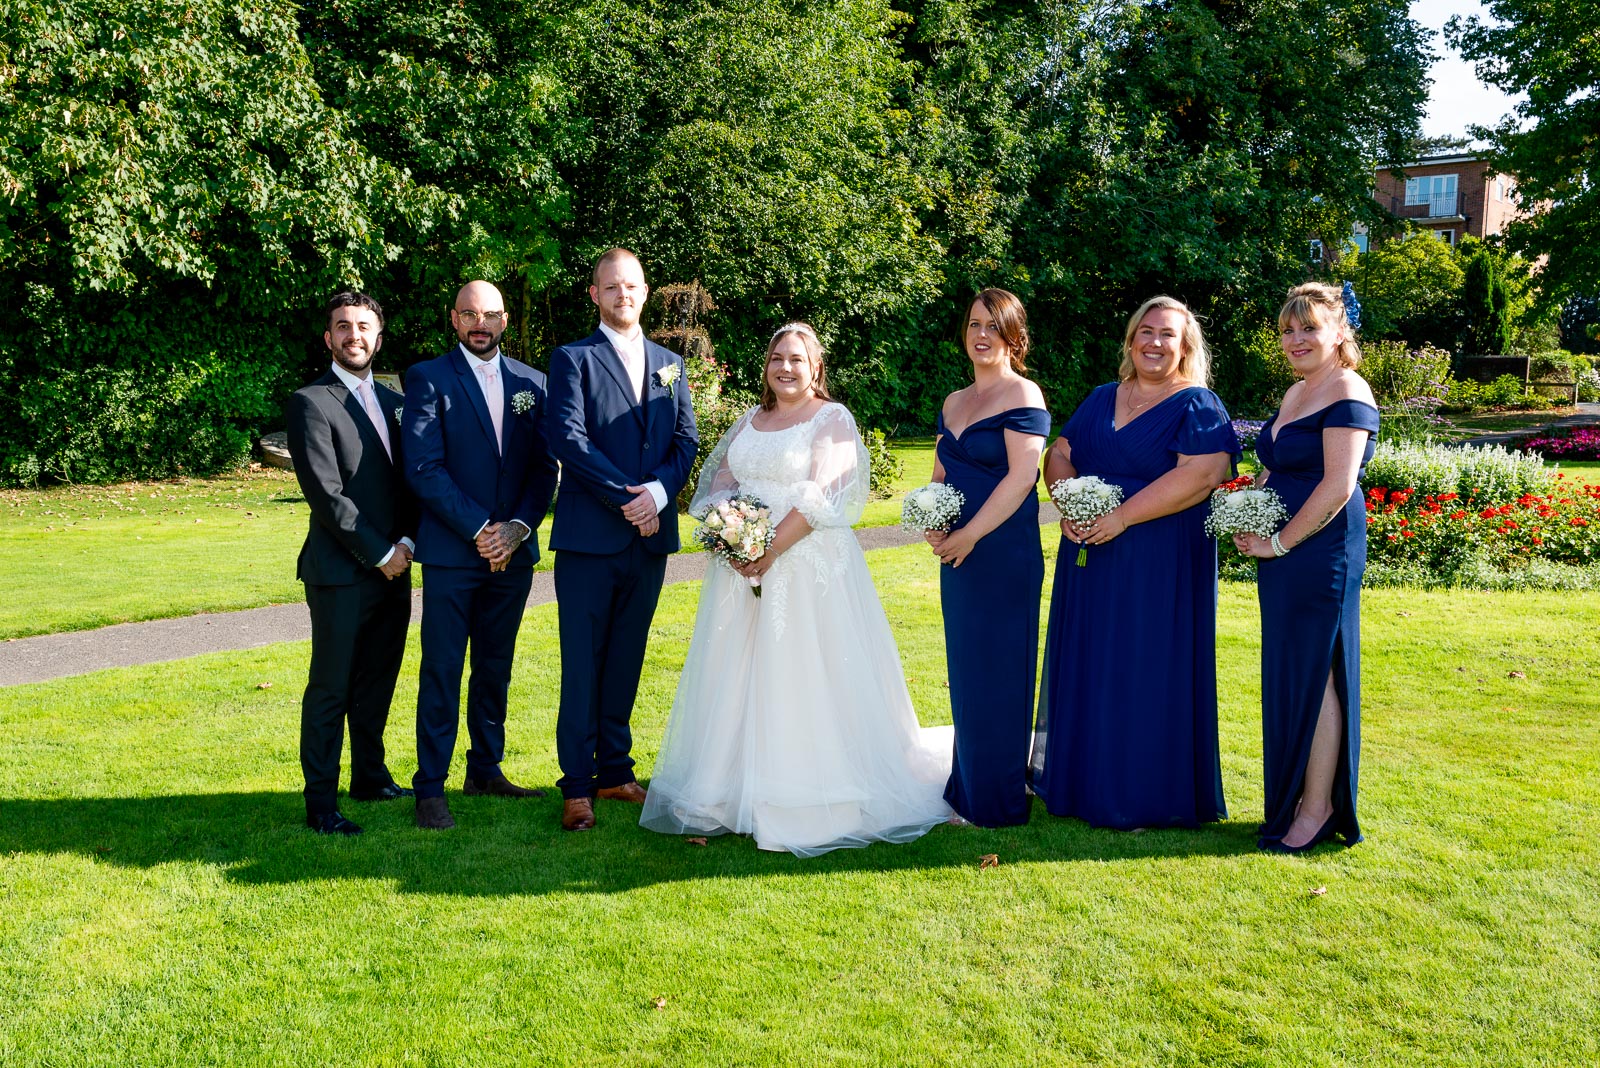 Catherine and Steve with the groomsmen and bridesmaids at Muster Green in Haywards Heath